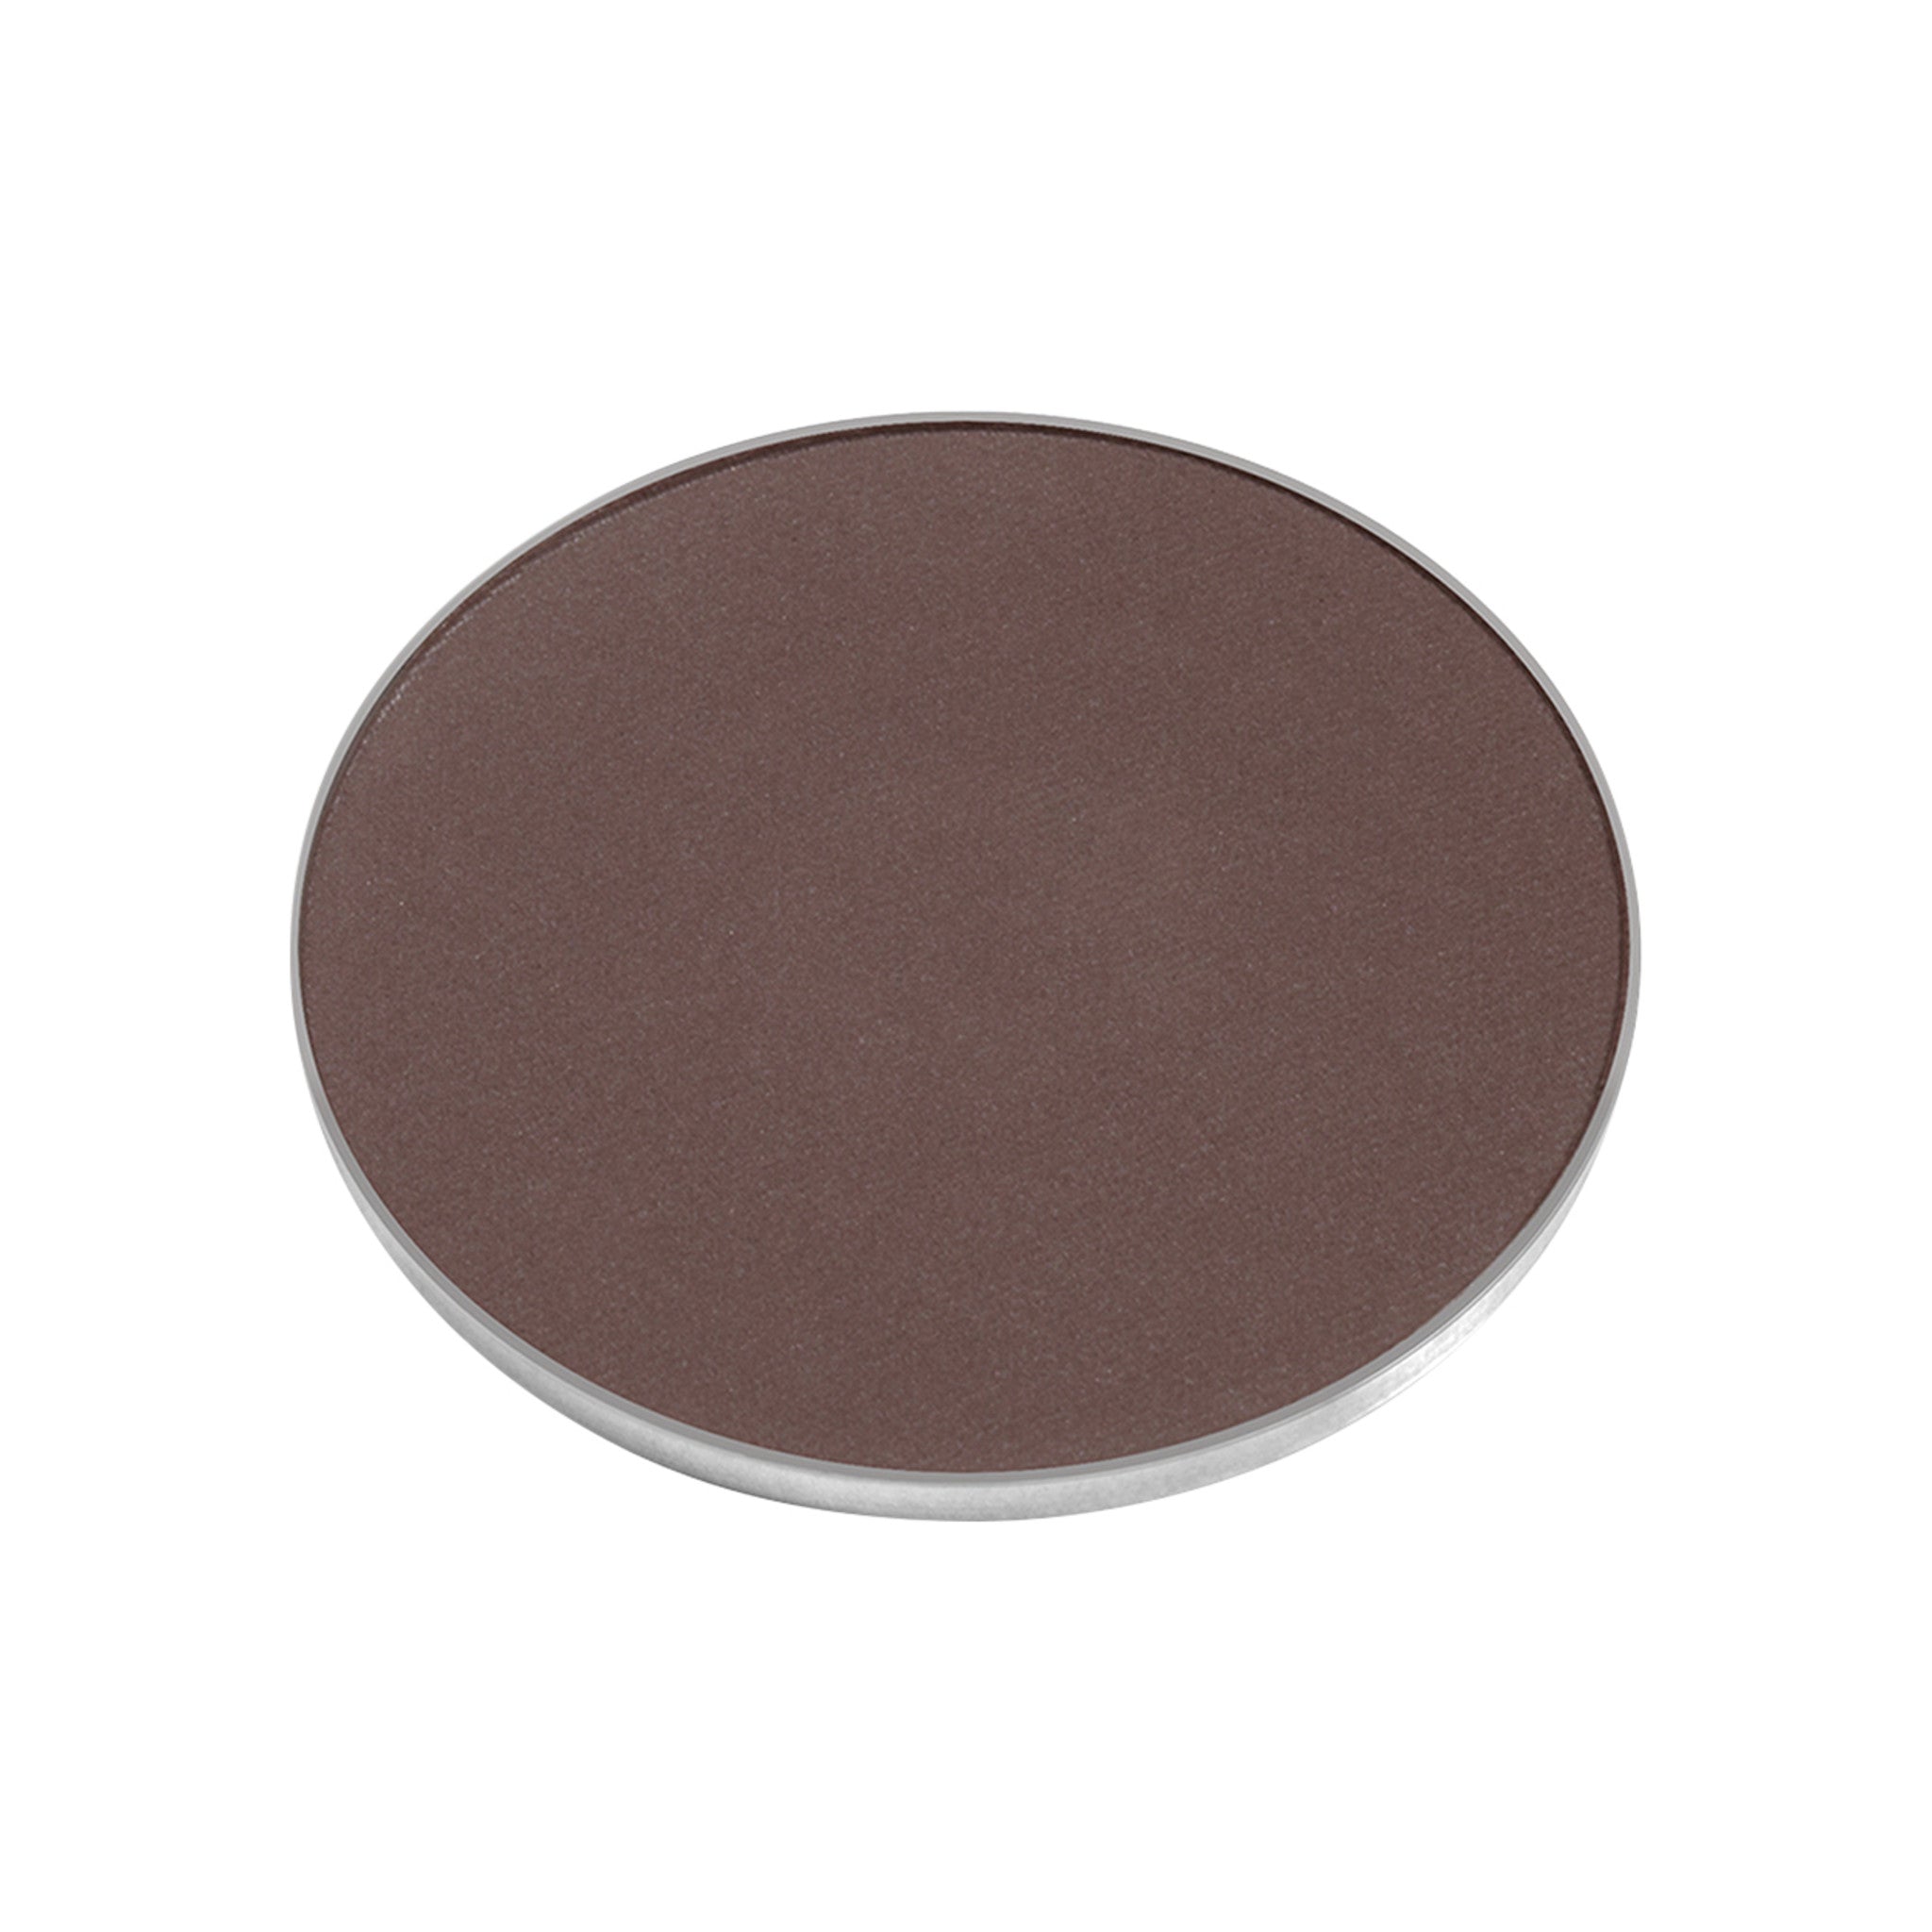 Chantecaille Eye Shade Refill Color/Shade variant: Patchouli main image. This product is in the color black